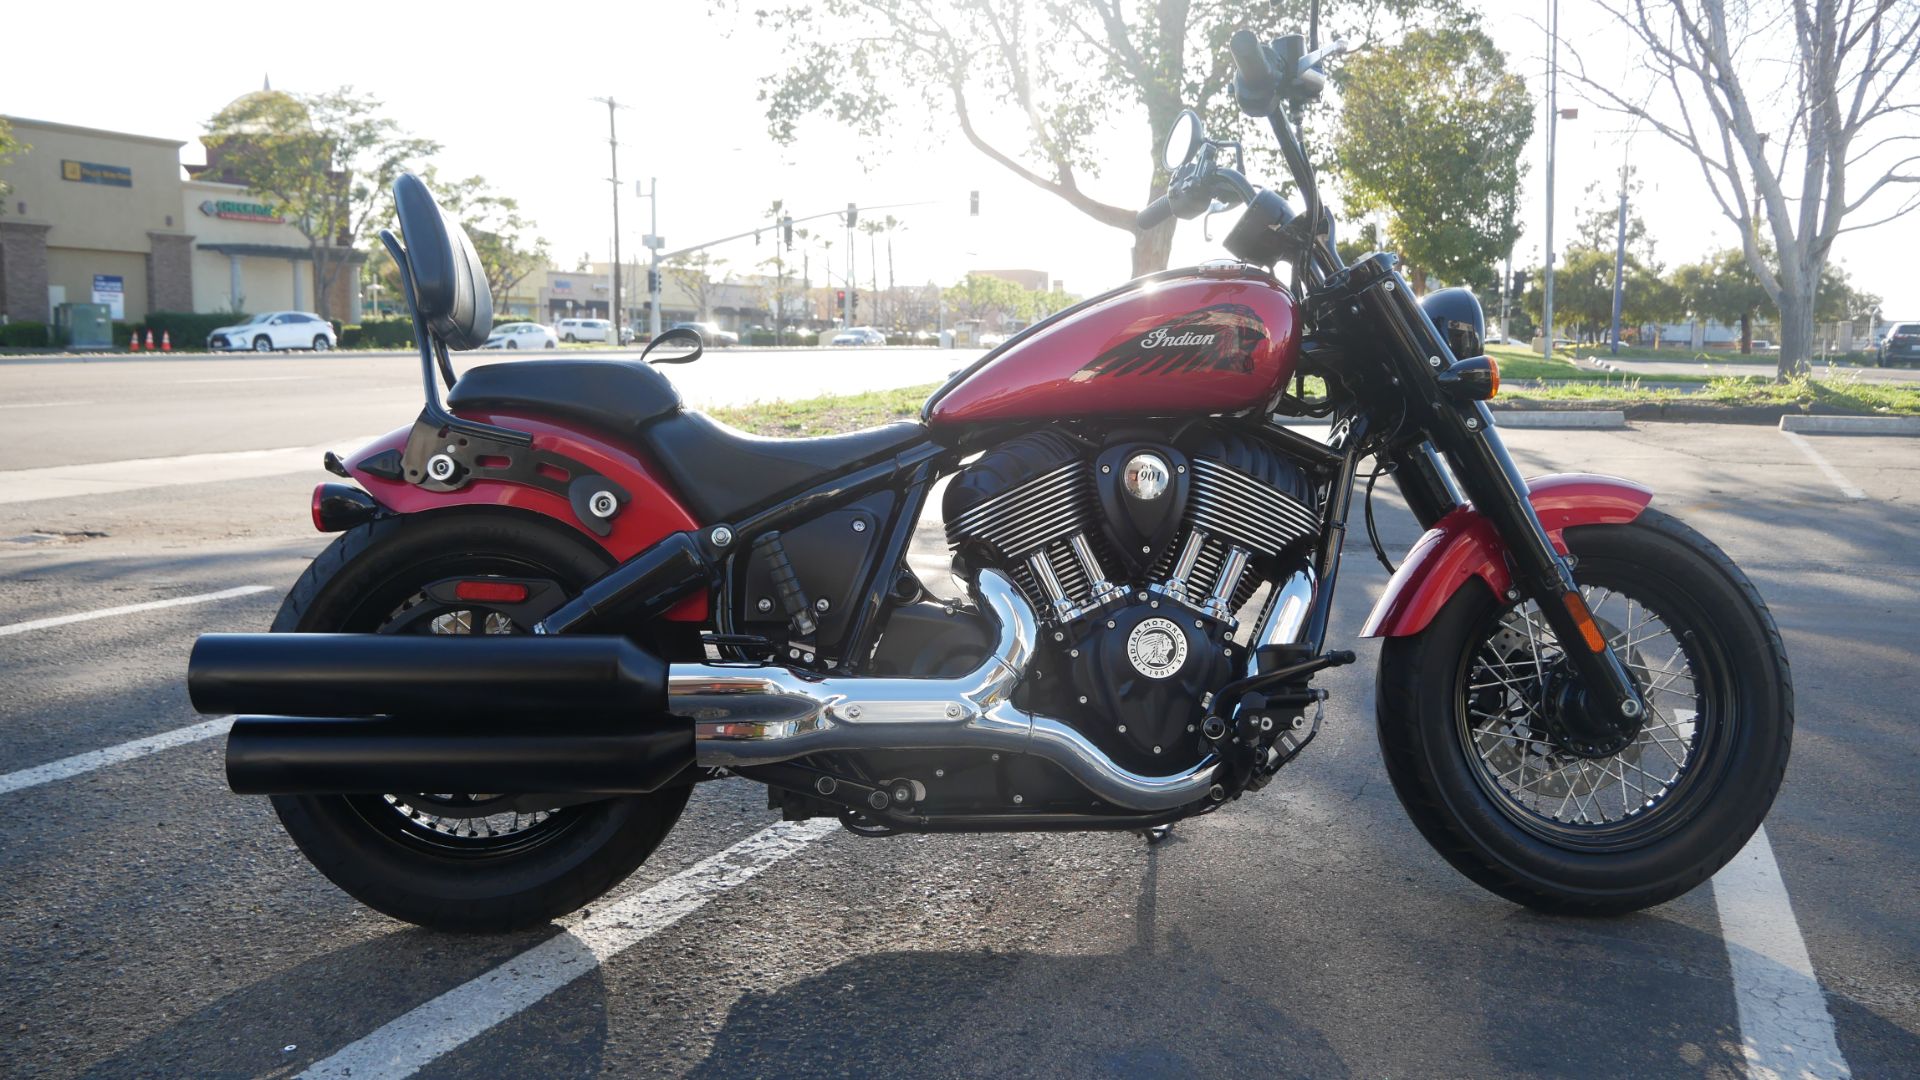 2022 Indian Motorcycle Chief Bobber ABS in San Diego, California - Photo 1